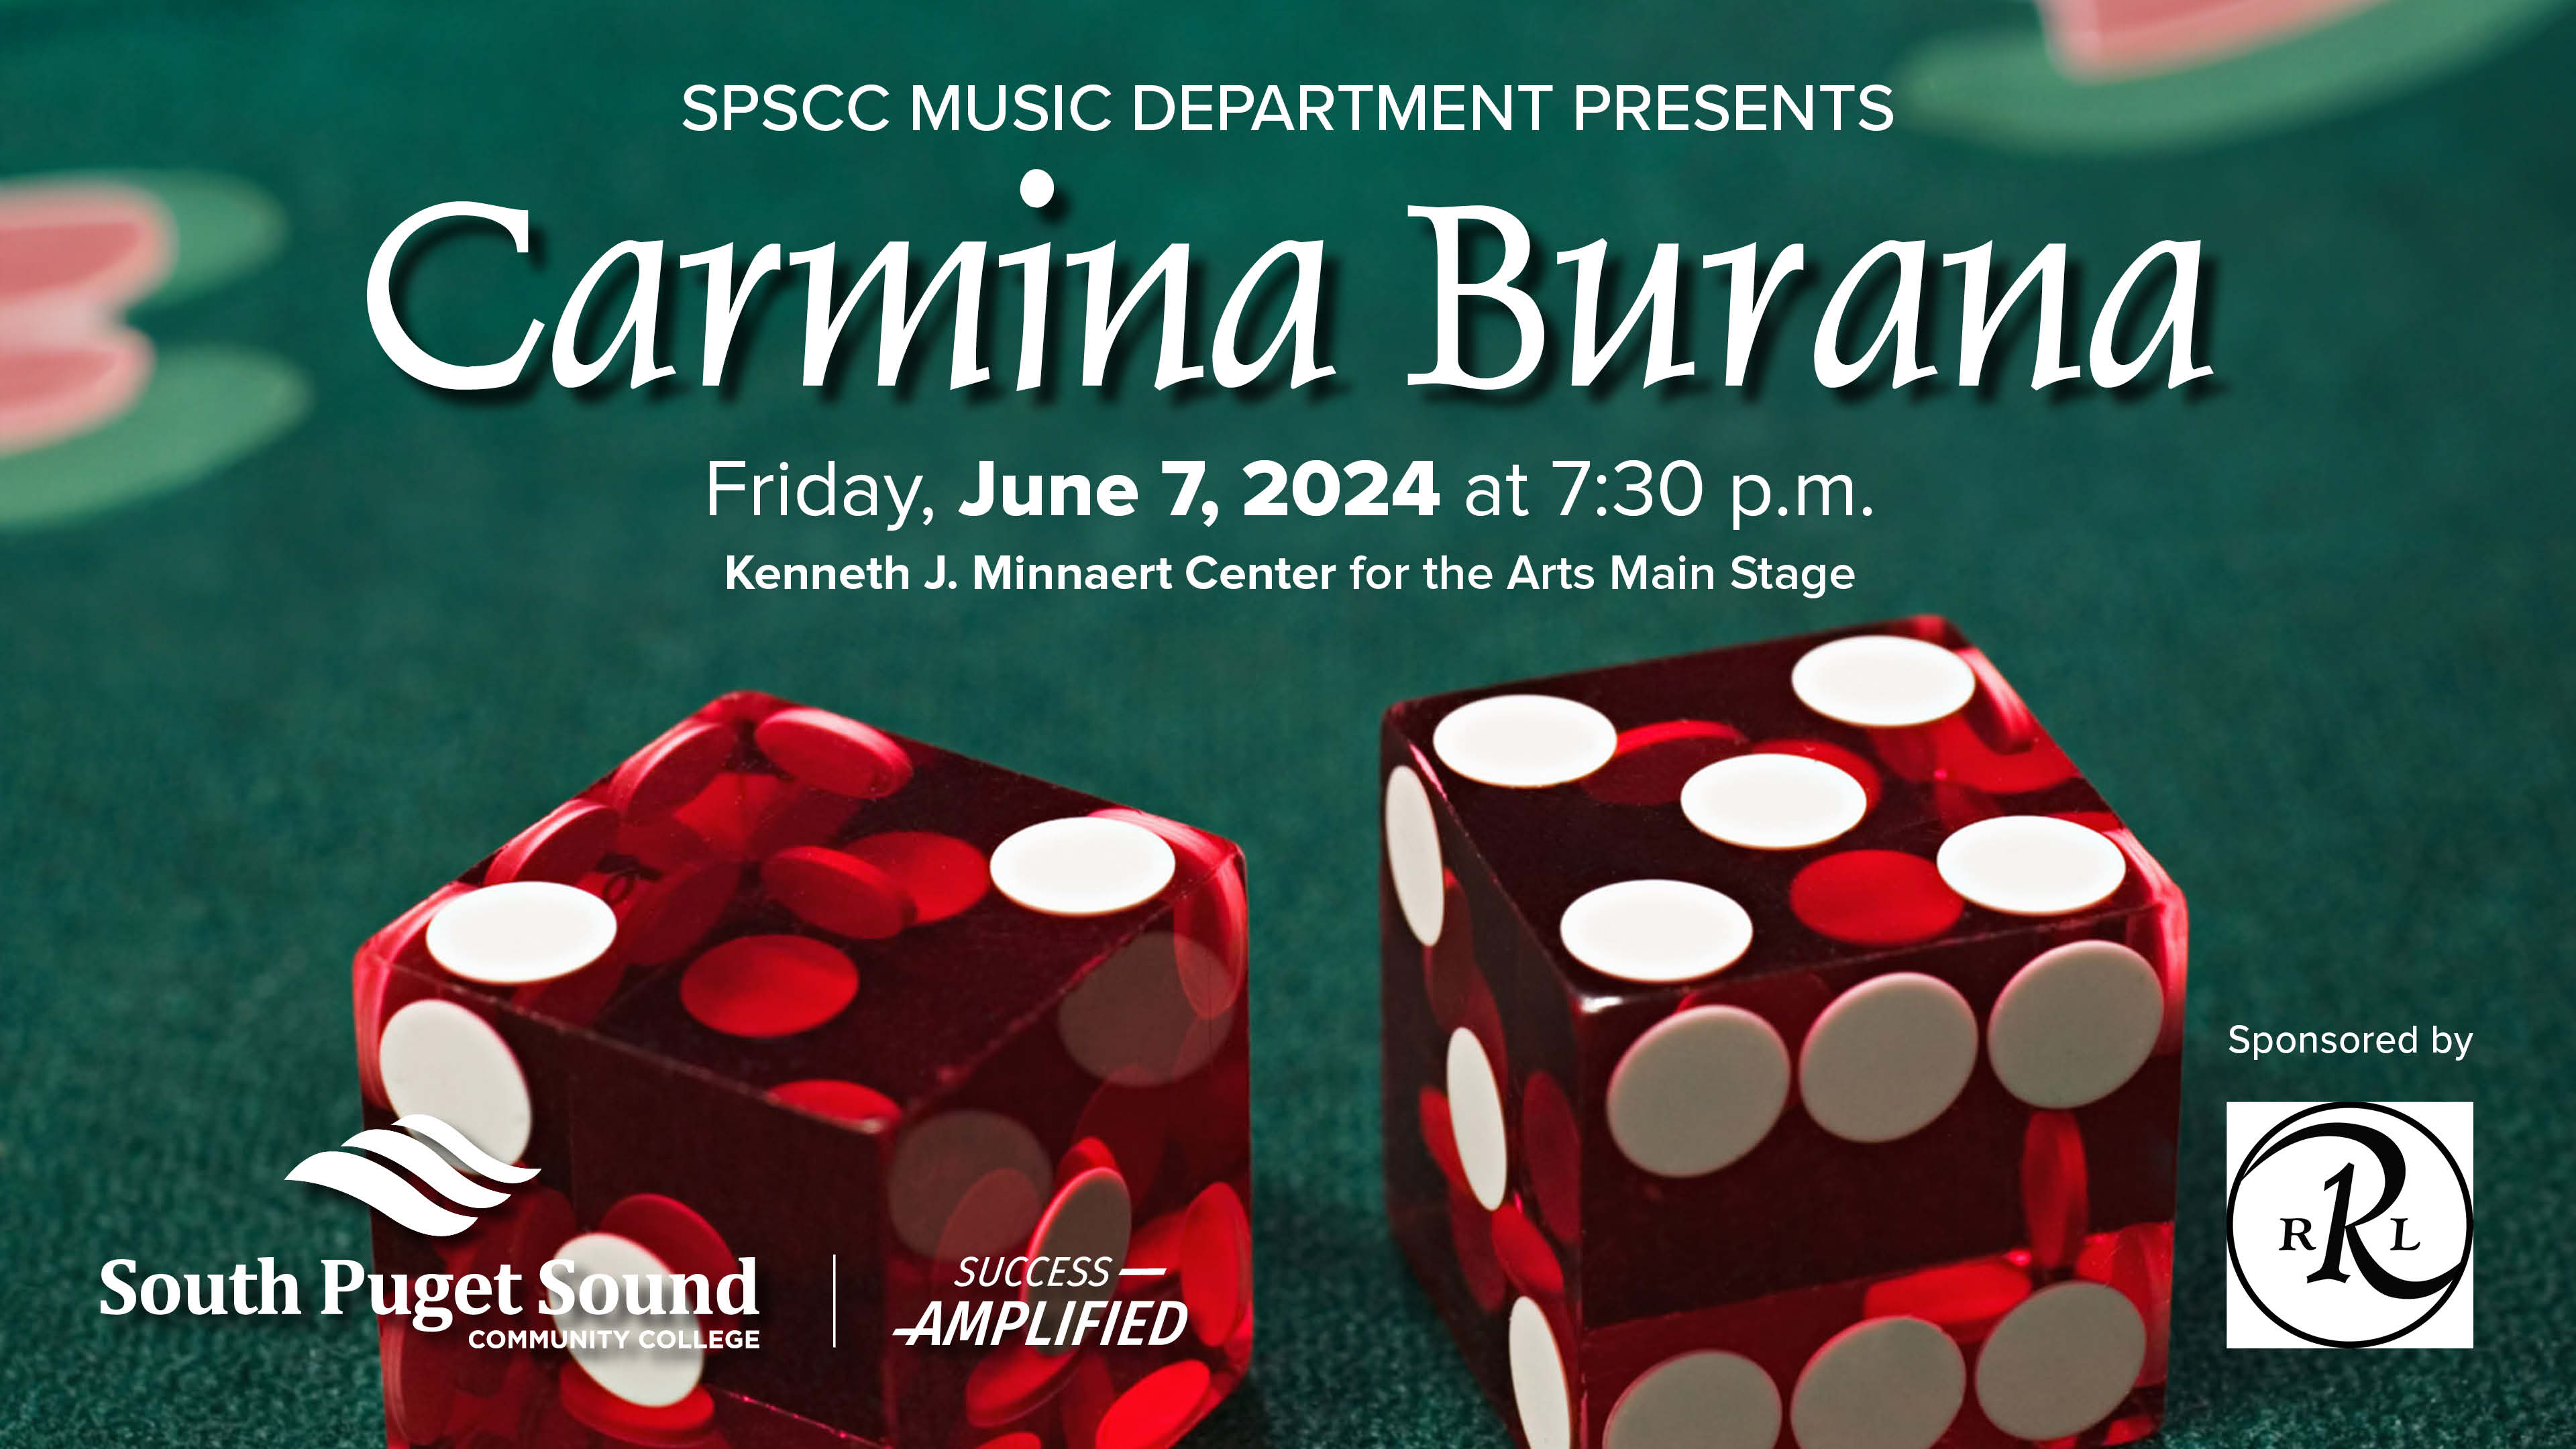 SPSCC Music Department Presents: Carmina Burana on Friday, June 7, 2024 at 7:30 p.m. at the Kenneth J. Minnaert Center for the Arts Main Stage